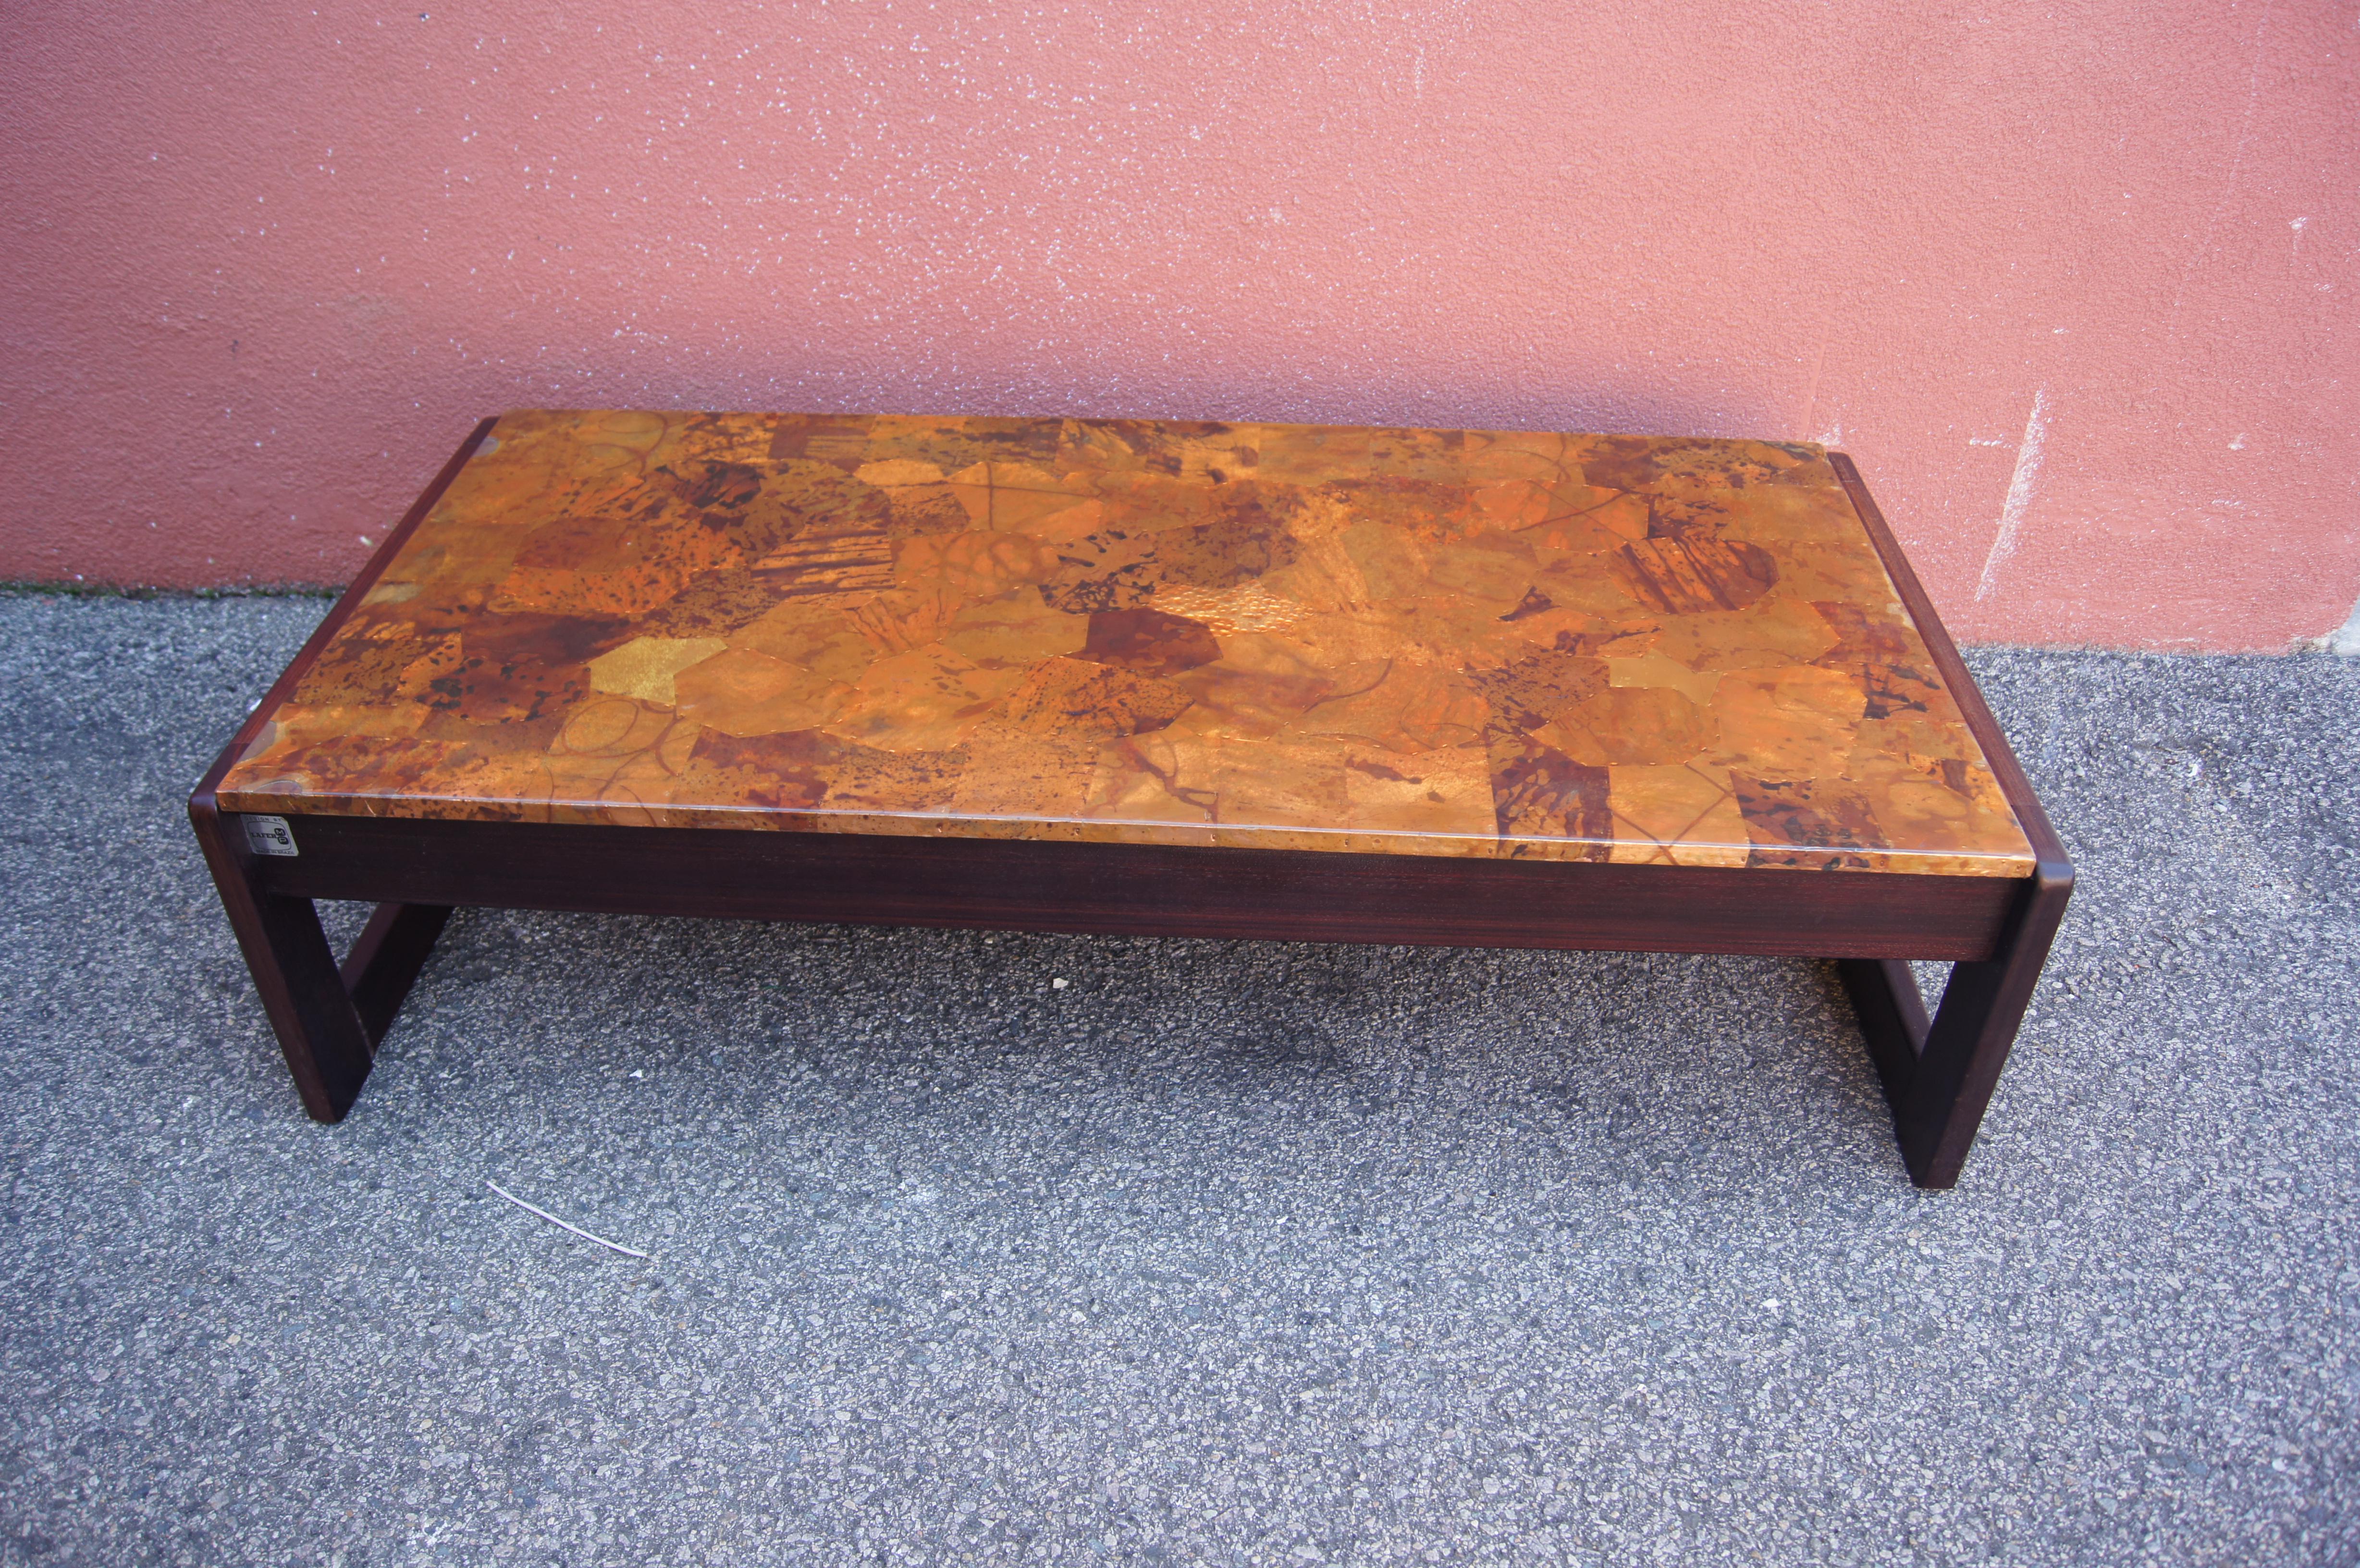 Designed by Brazilian modernist Percival Lafer, this jacaranda rosewood coffee table features a bold rectangular frame with exposed hardware. The top is crafted of beautifully patinated patchwork copper. 

Lafer label on frame. Note condition